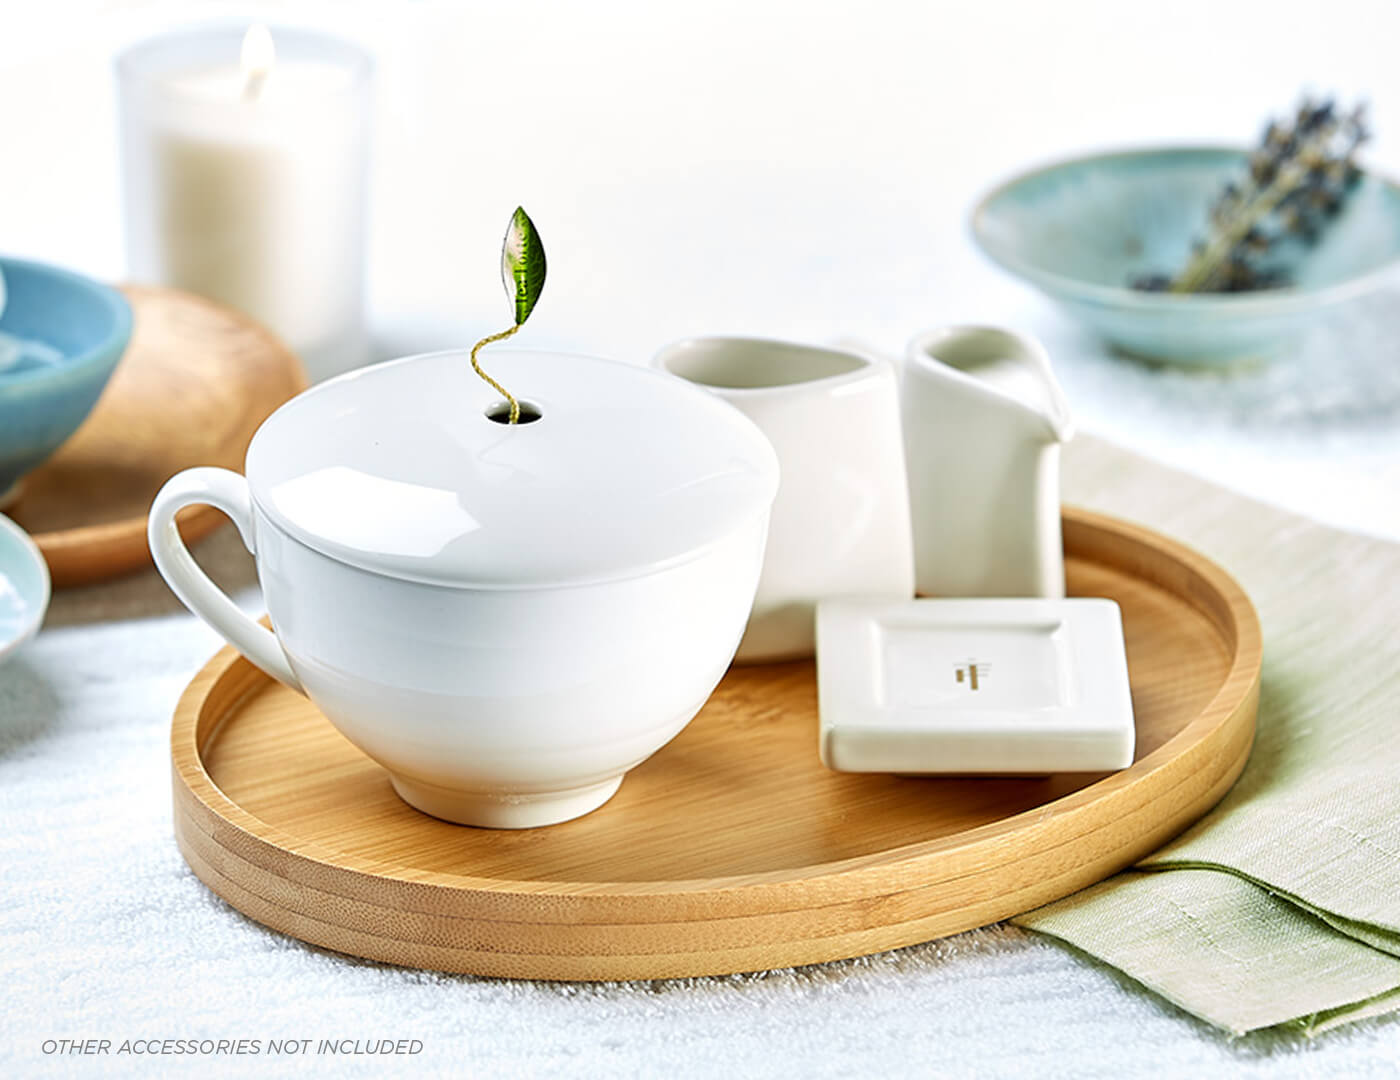 Café Cup with lid in a spa setting placed on a Bamboo Tray with a Tea Tray and Sugar & Creamer Set.